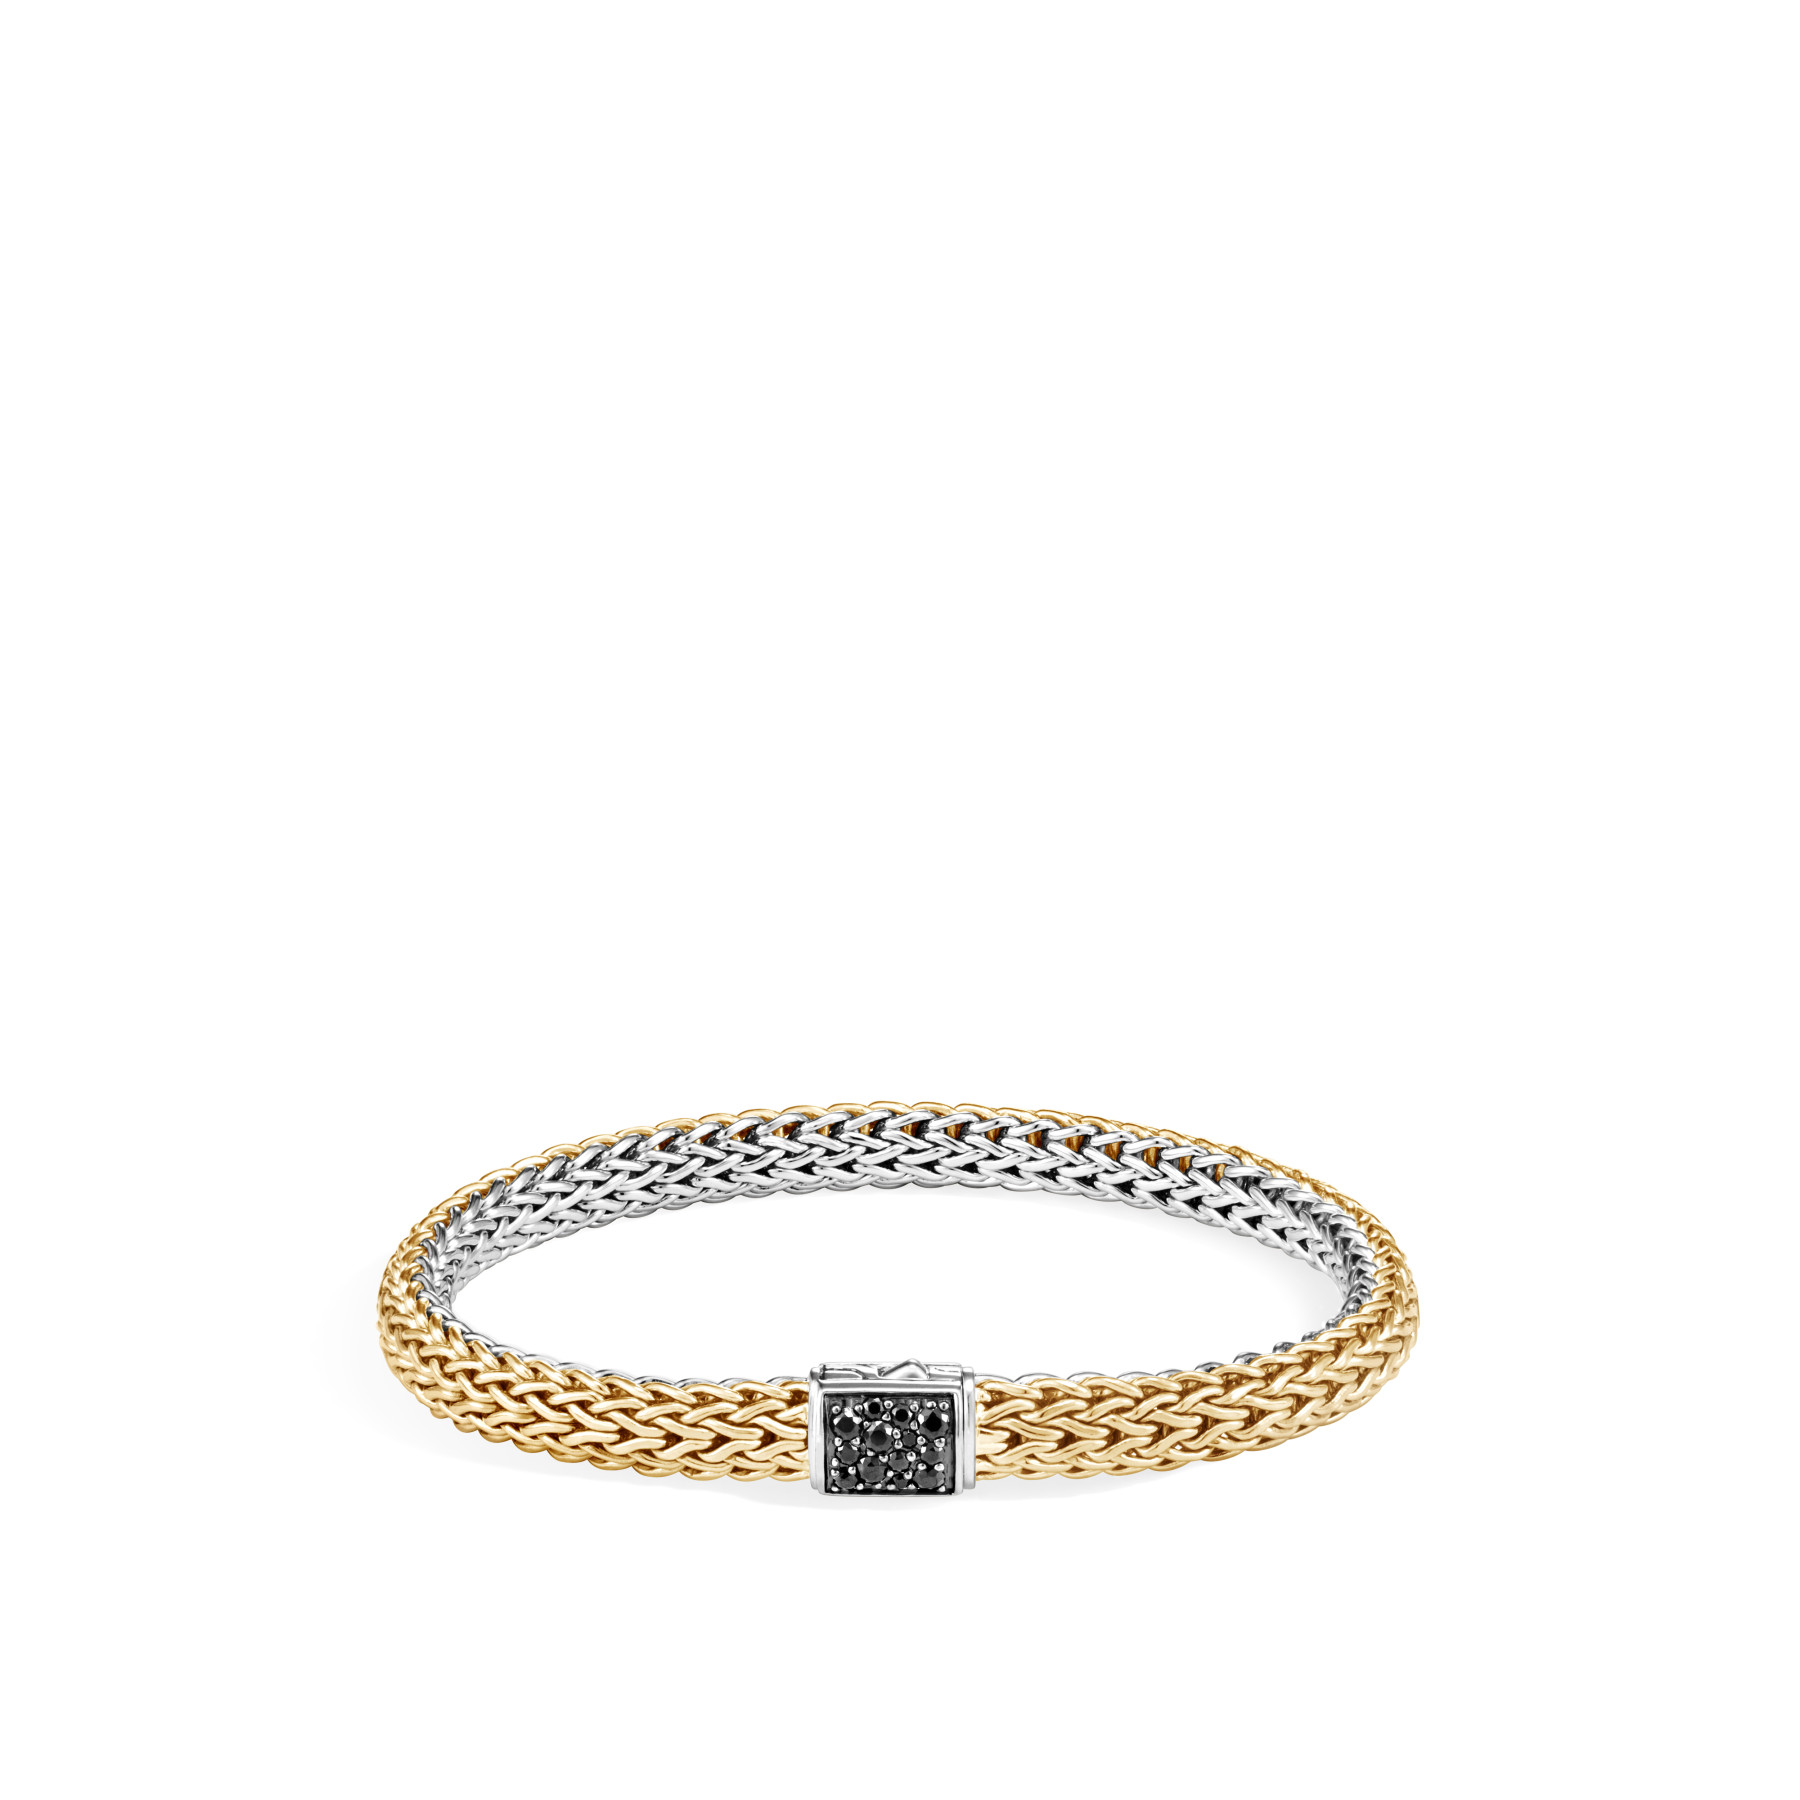 John Hardy Classic Chain Two Tone Gemstone Bracelet with Diamonds and Sapphires (5mm)